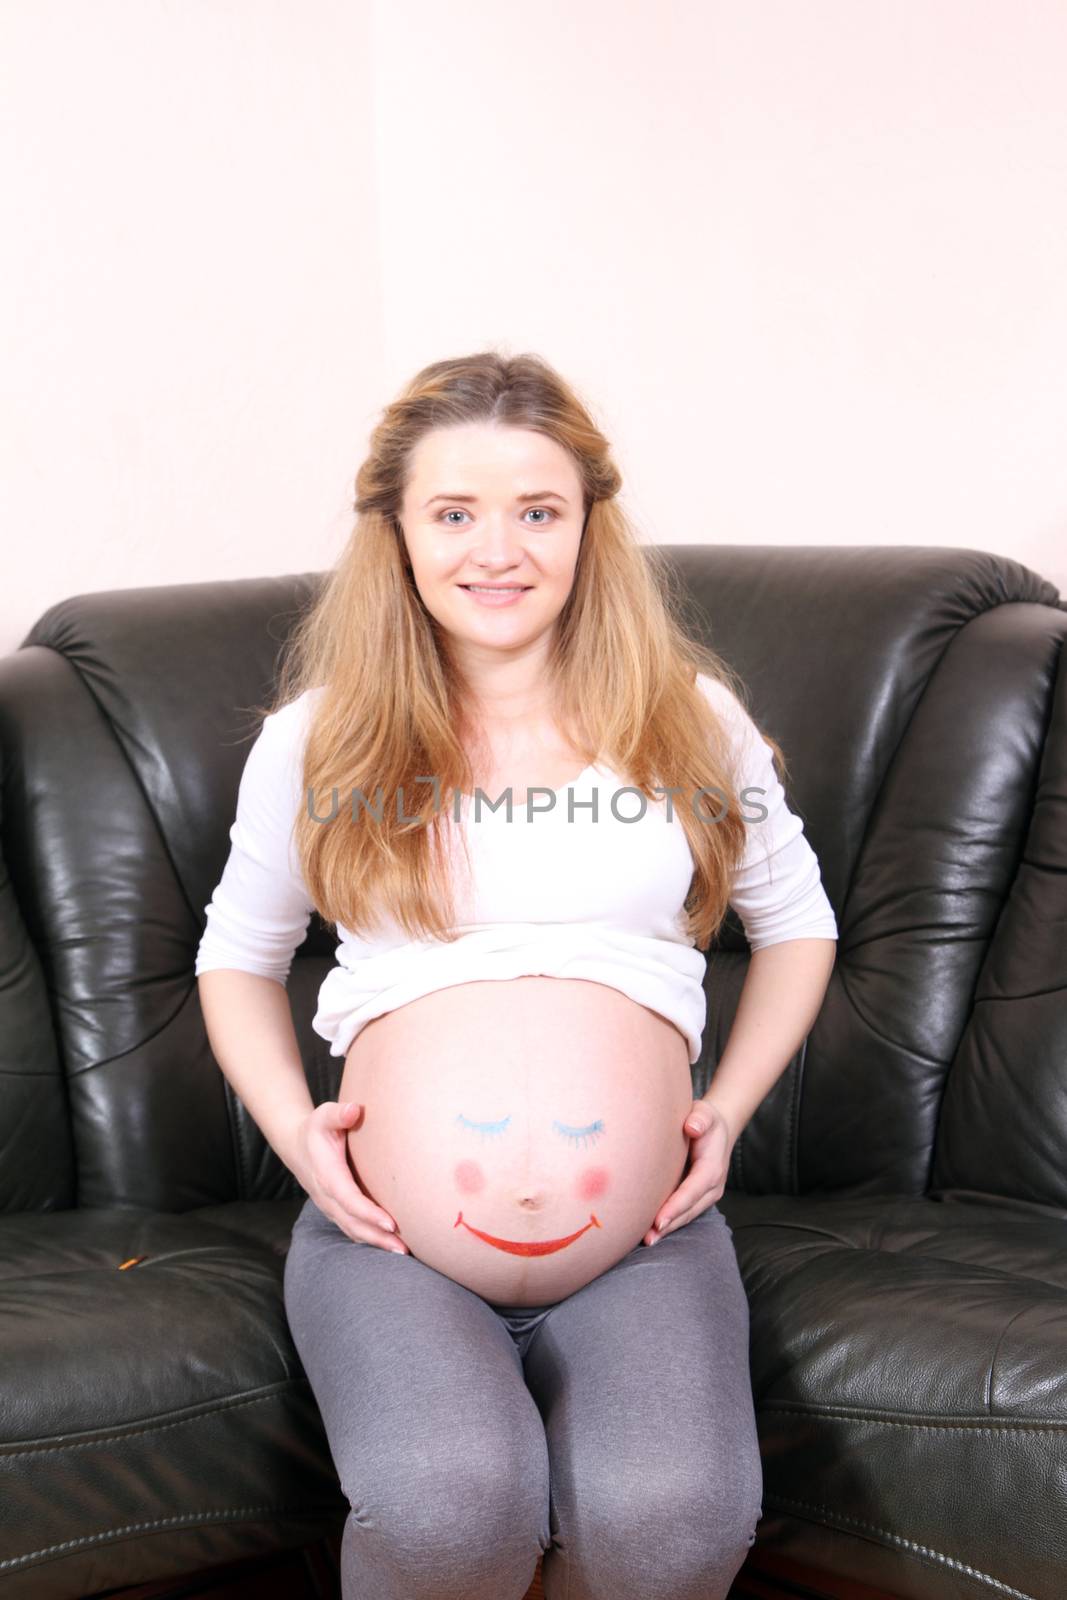 Pregnant woman with painted eyes on his stomach and mouth.